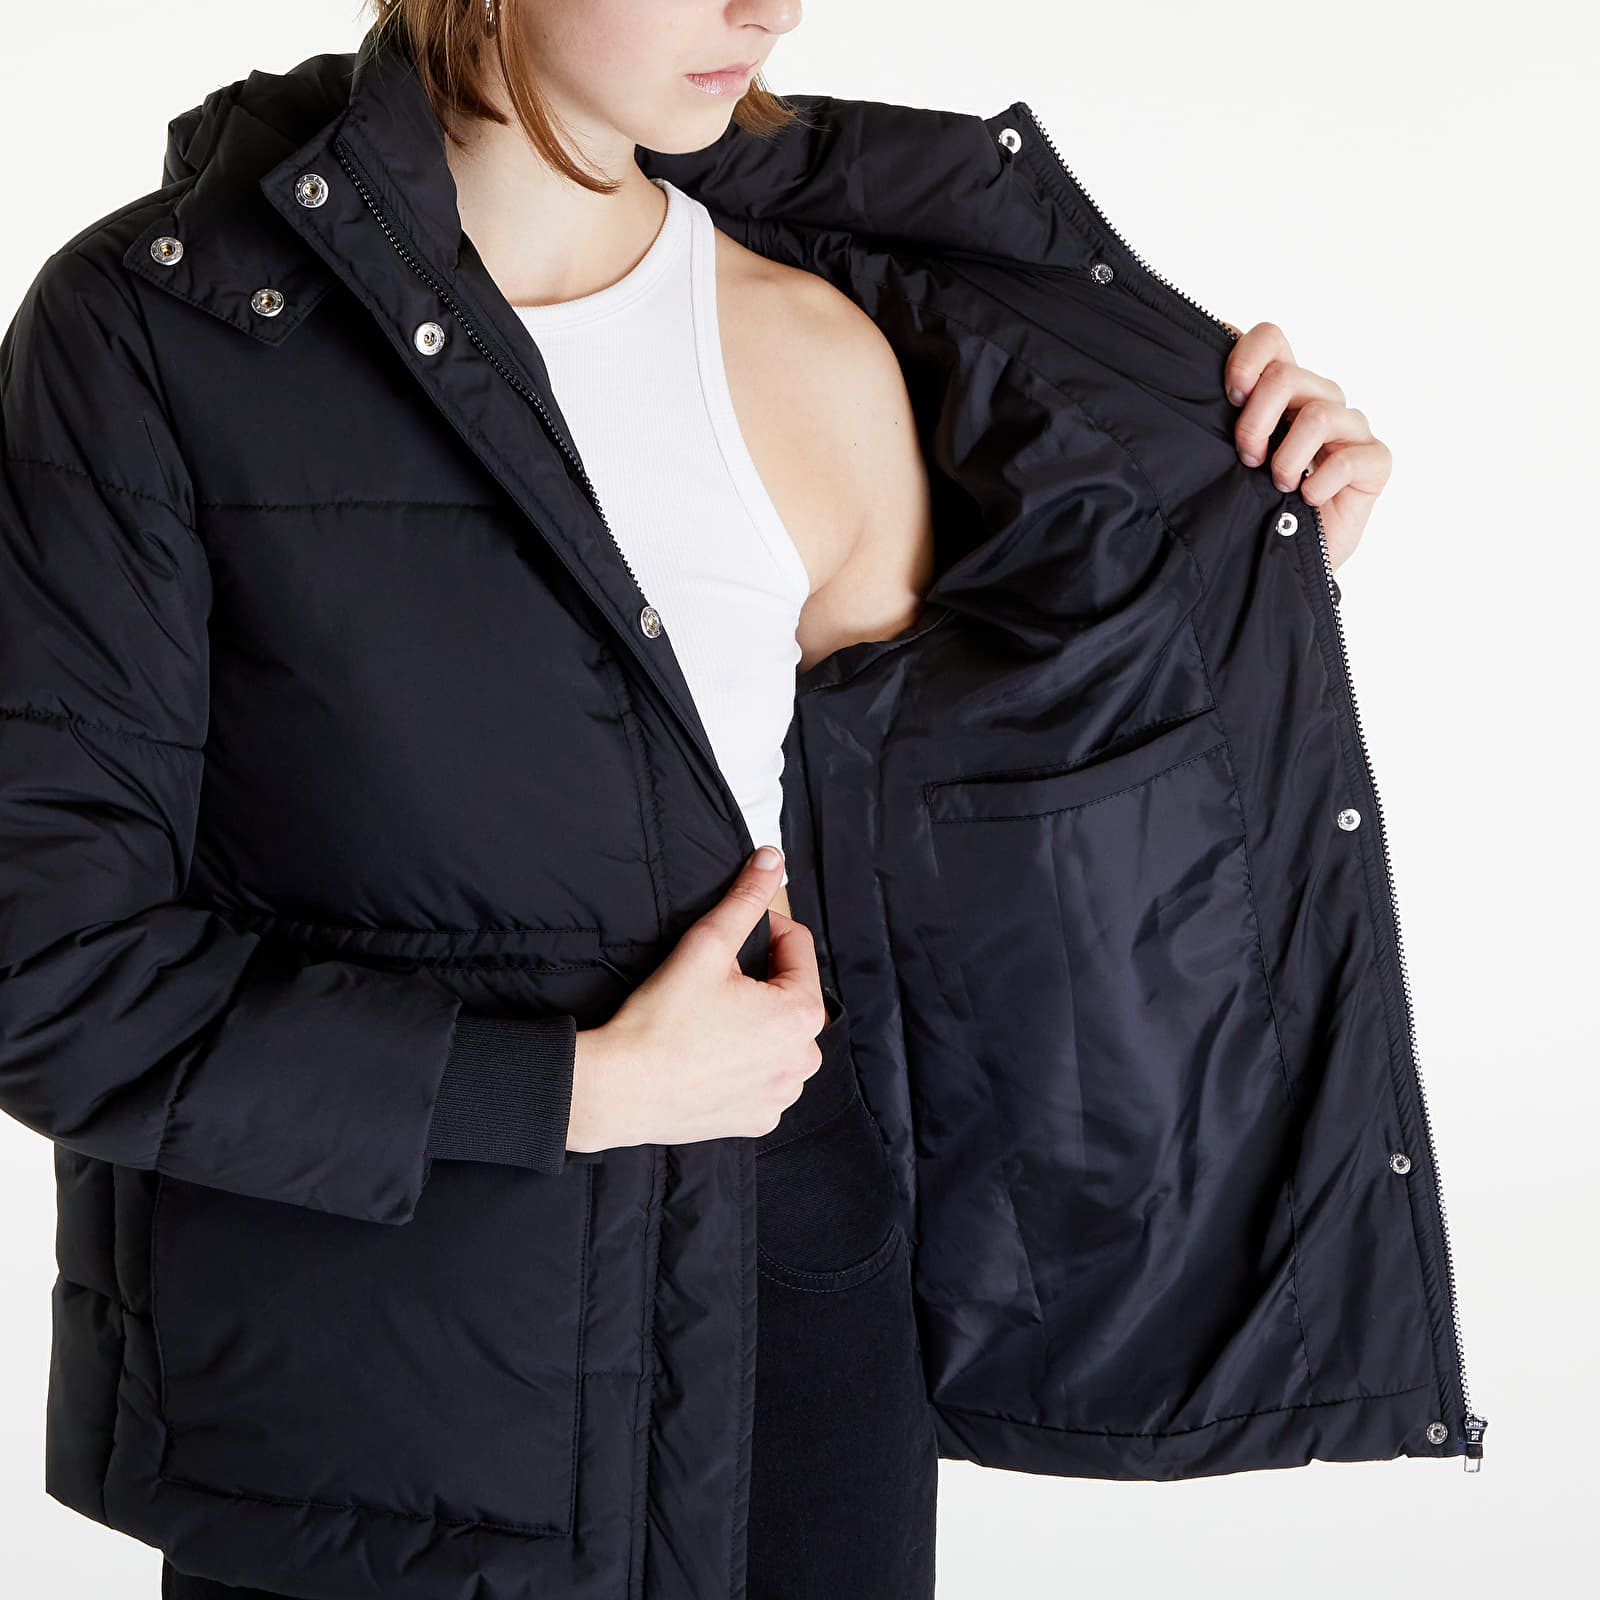 Classics | Ladies Urban Black Waisted Puffer Jackets Queens Jacket